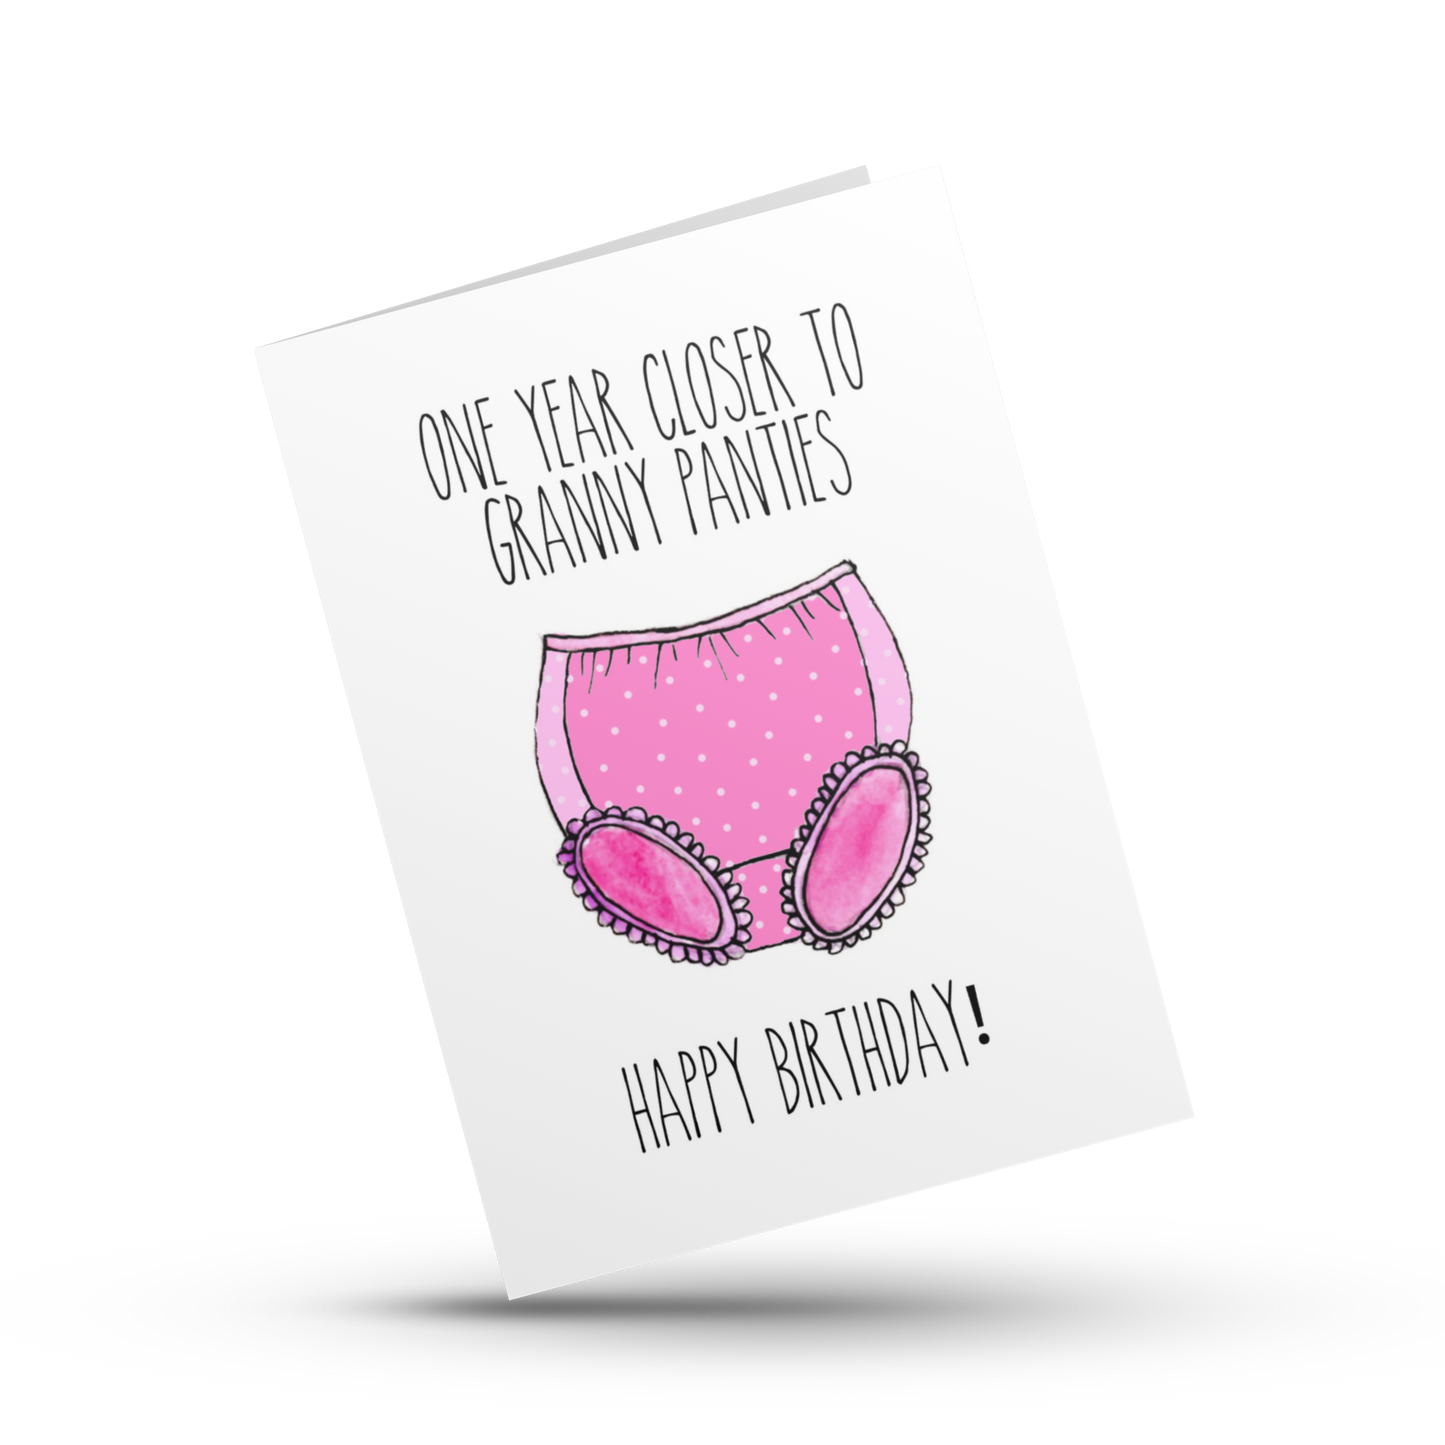 One year closer to granny panties, Funny birthday card, Birthday card for best friend, Old lady card, Granny pants card, Old age joke card